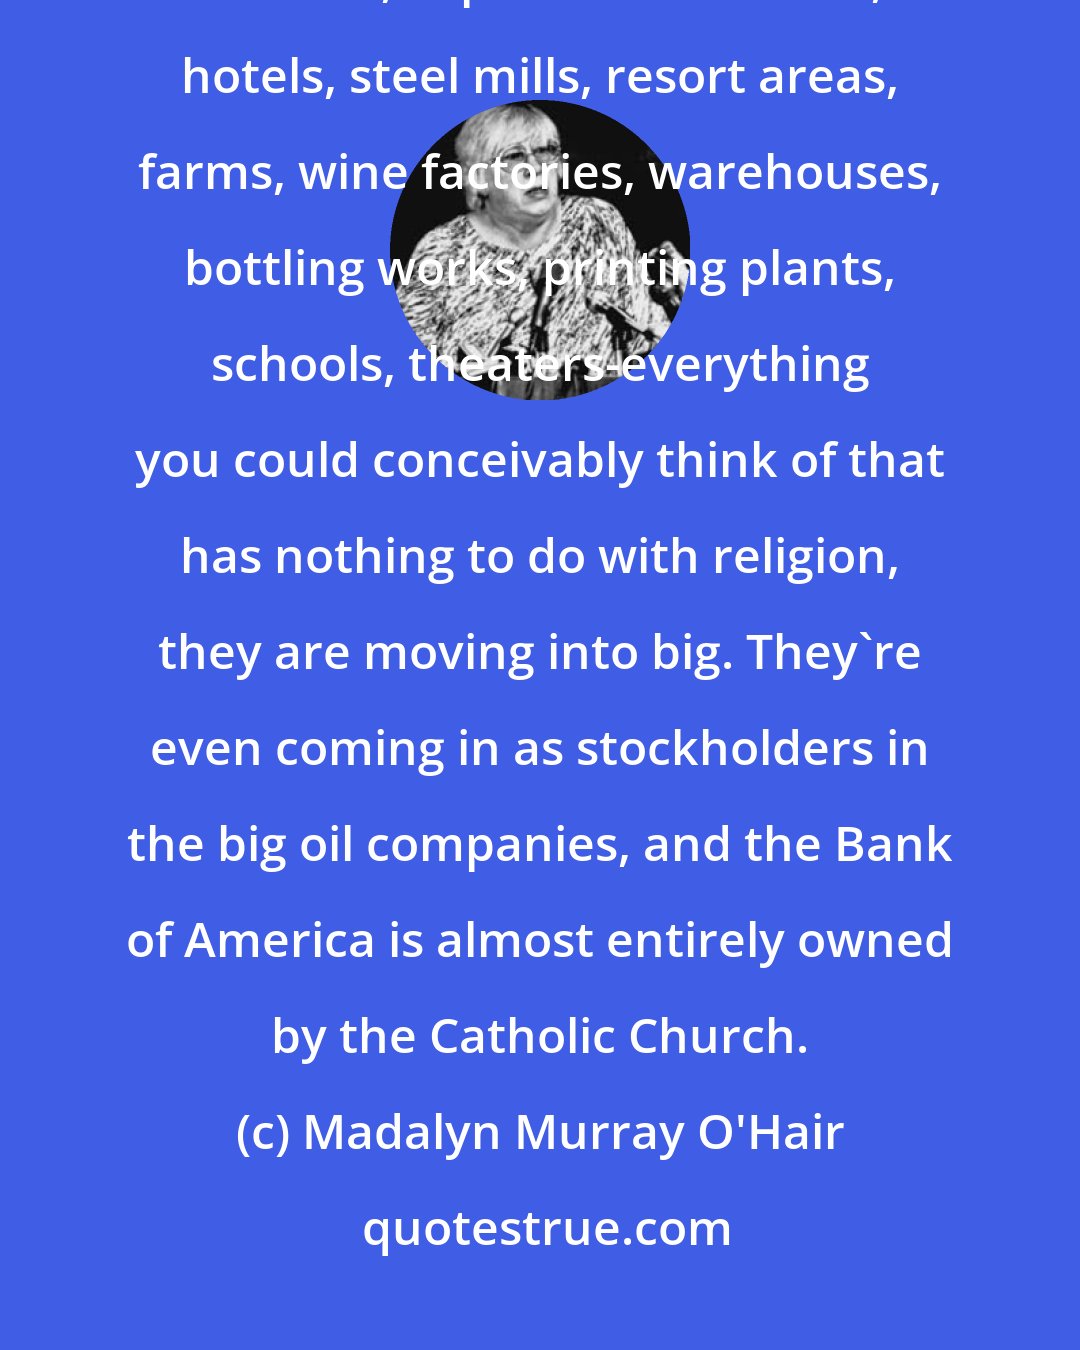 Madalyn Murray O'Hair: Church wealth are moving into everything-gas stations, banks, television stations, supermarket chains, hotels, steel mills, resort areas, farms, wine factories, warehouses, bottling works, printing plants, schools, theaters-everything you could conceivably think of that has nothing to do with religion, they are moving into big. They're even coming in as stockholders in the big oil companies, and the Bank of America is almost entirely owned by the Catholic Church.